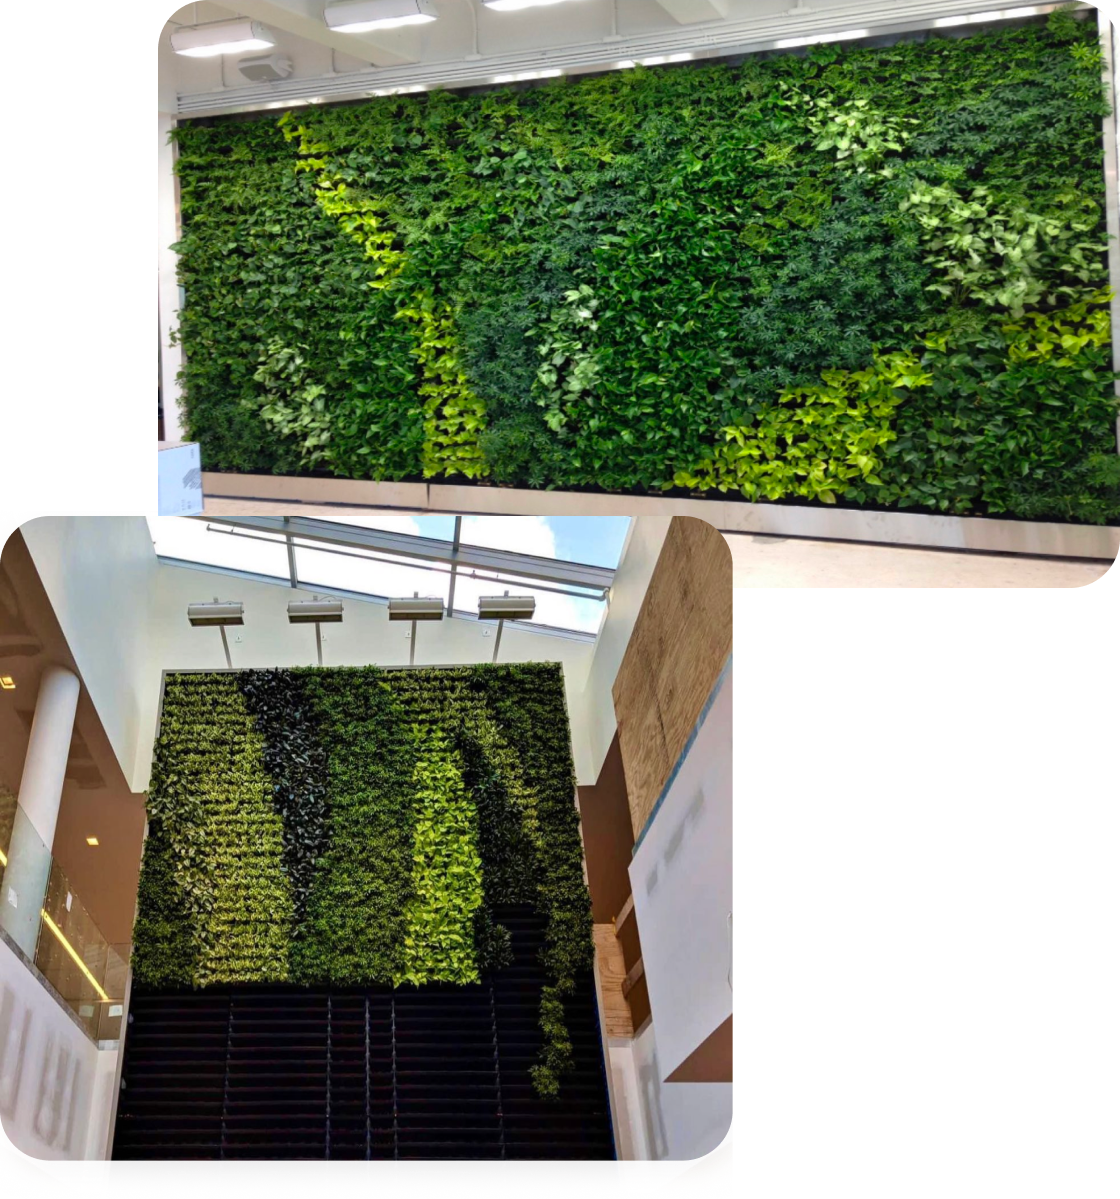 Two pictures of a Living green wall in a Vermont building.